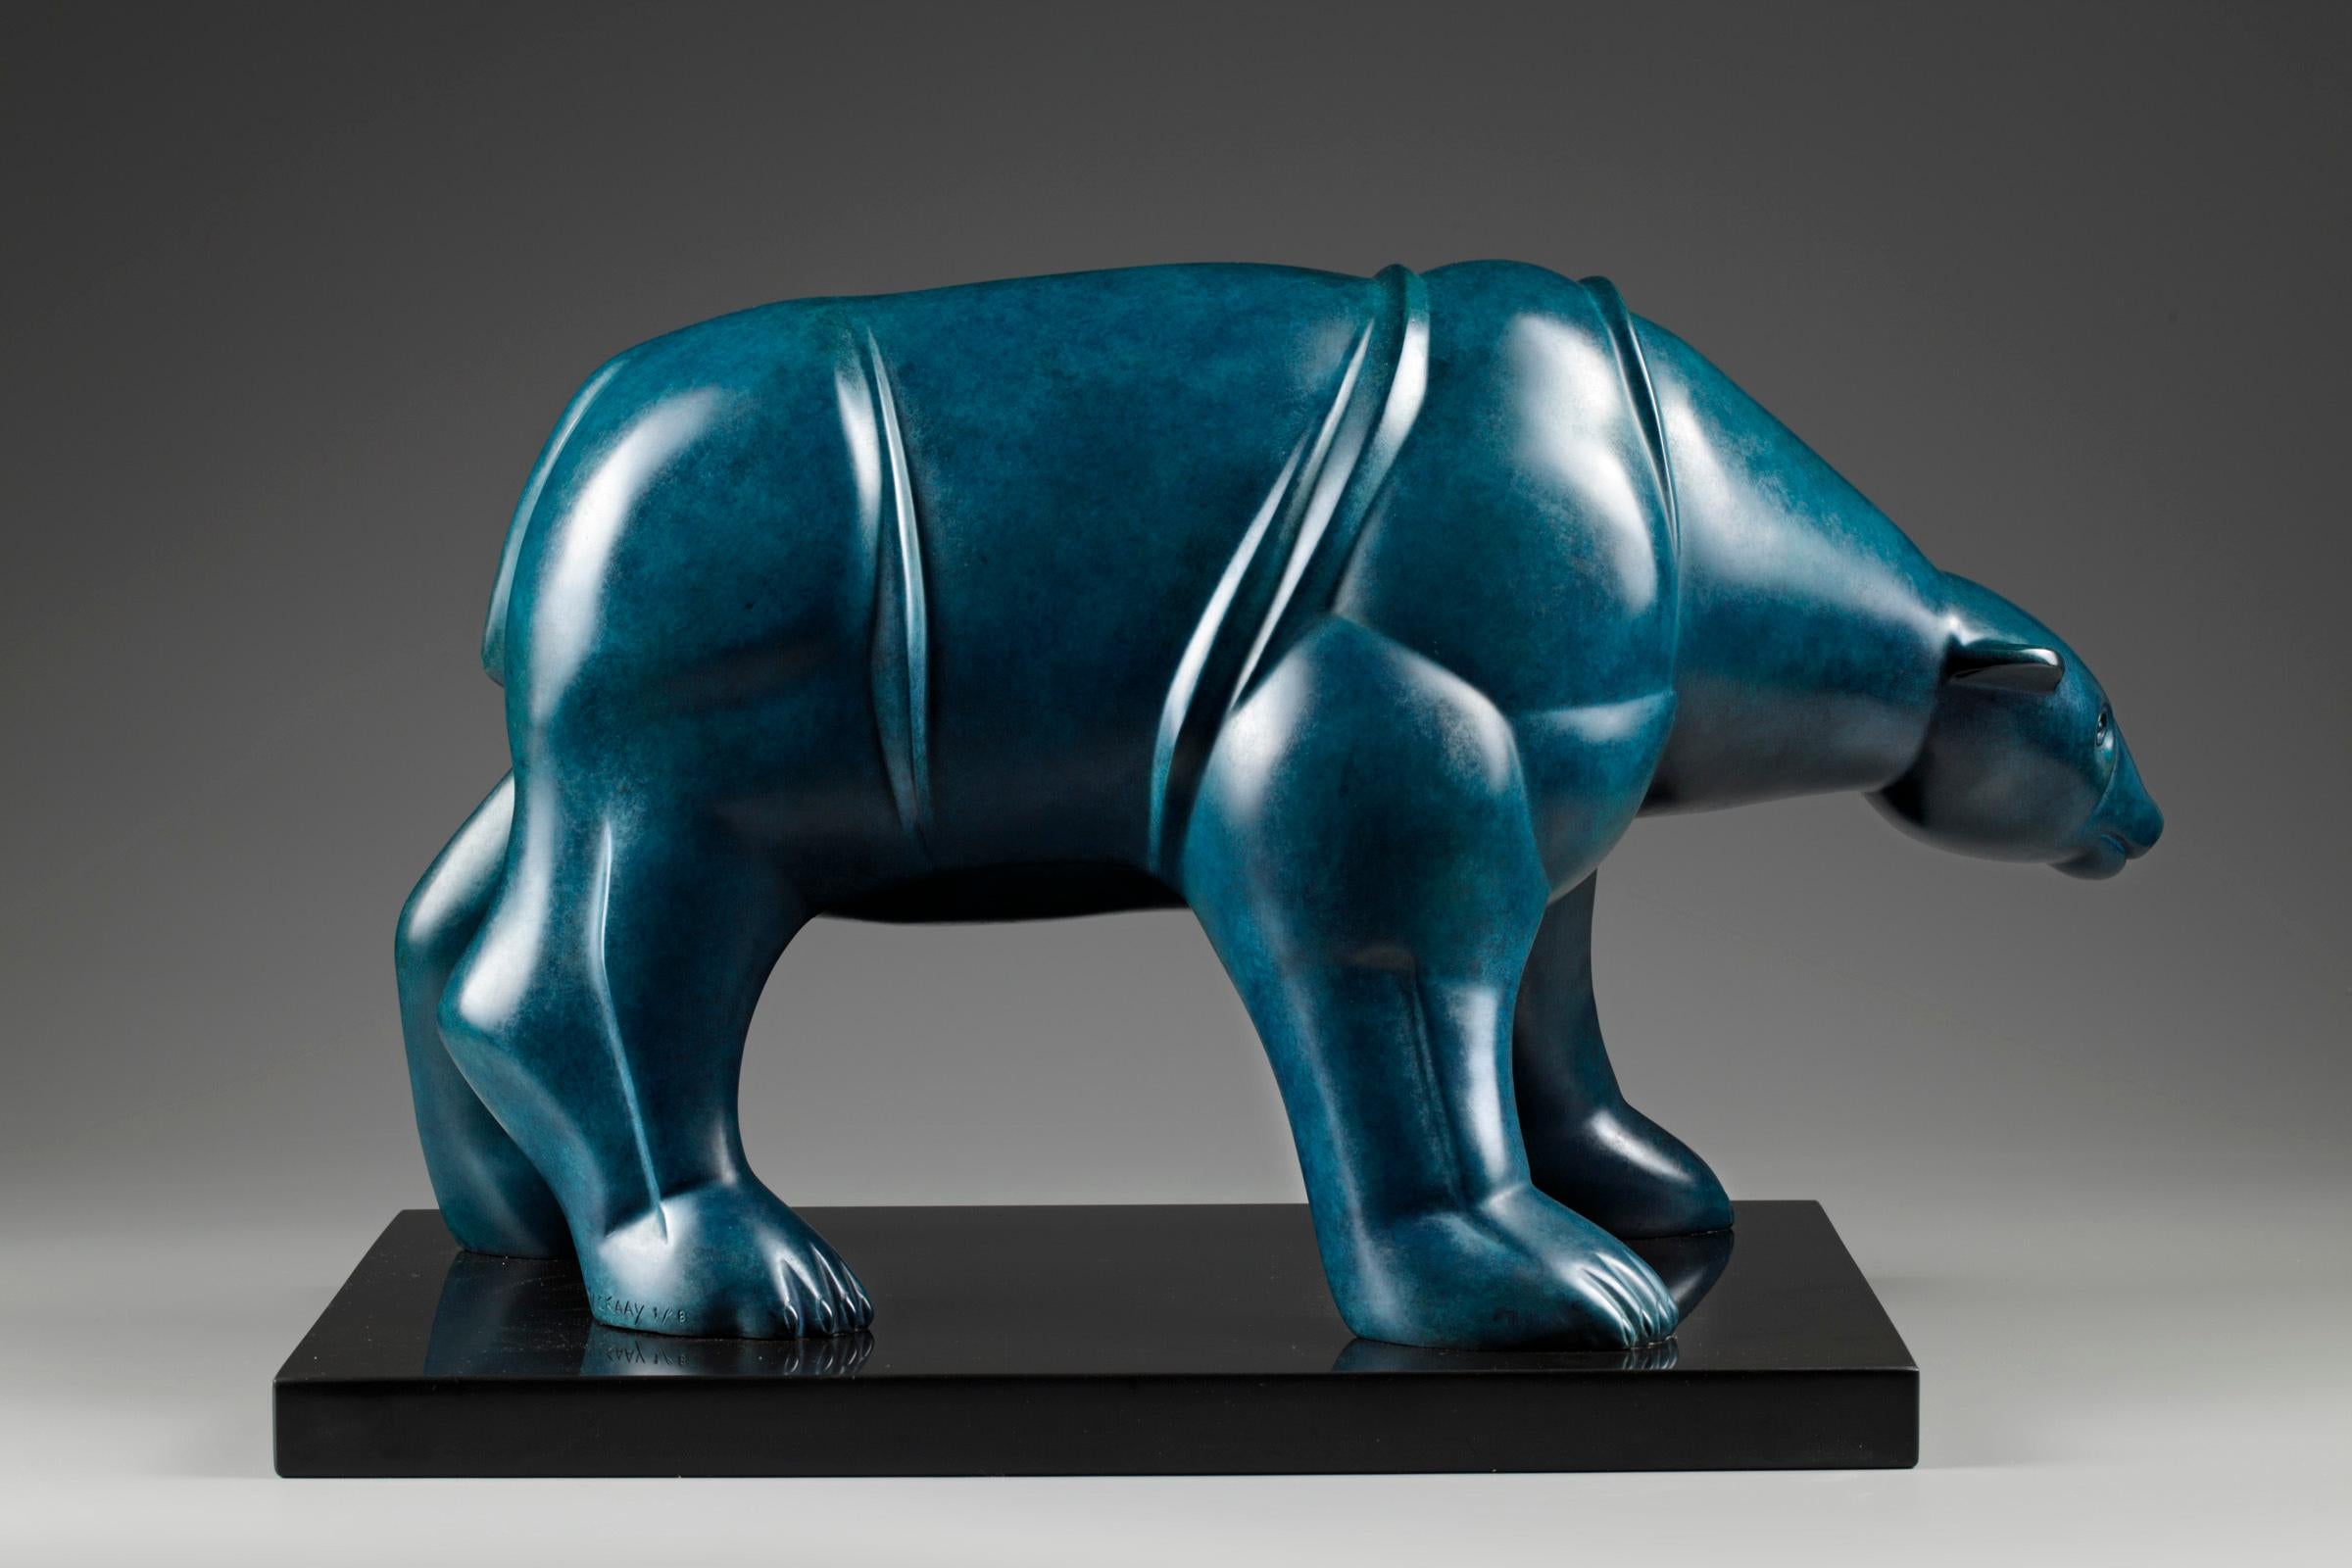 IJsbeer Polar Bear Bronze Sculpture Animal Blue Green Patina In Stock
Theo Mackaay (1950) Utrecht, the Netherlands 

Mackaay works with recognizable shape:: women, men and animals, with a pointer at the primal form. Archetypal motives like warriors,